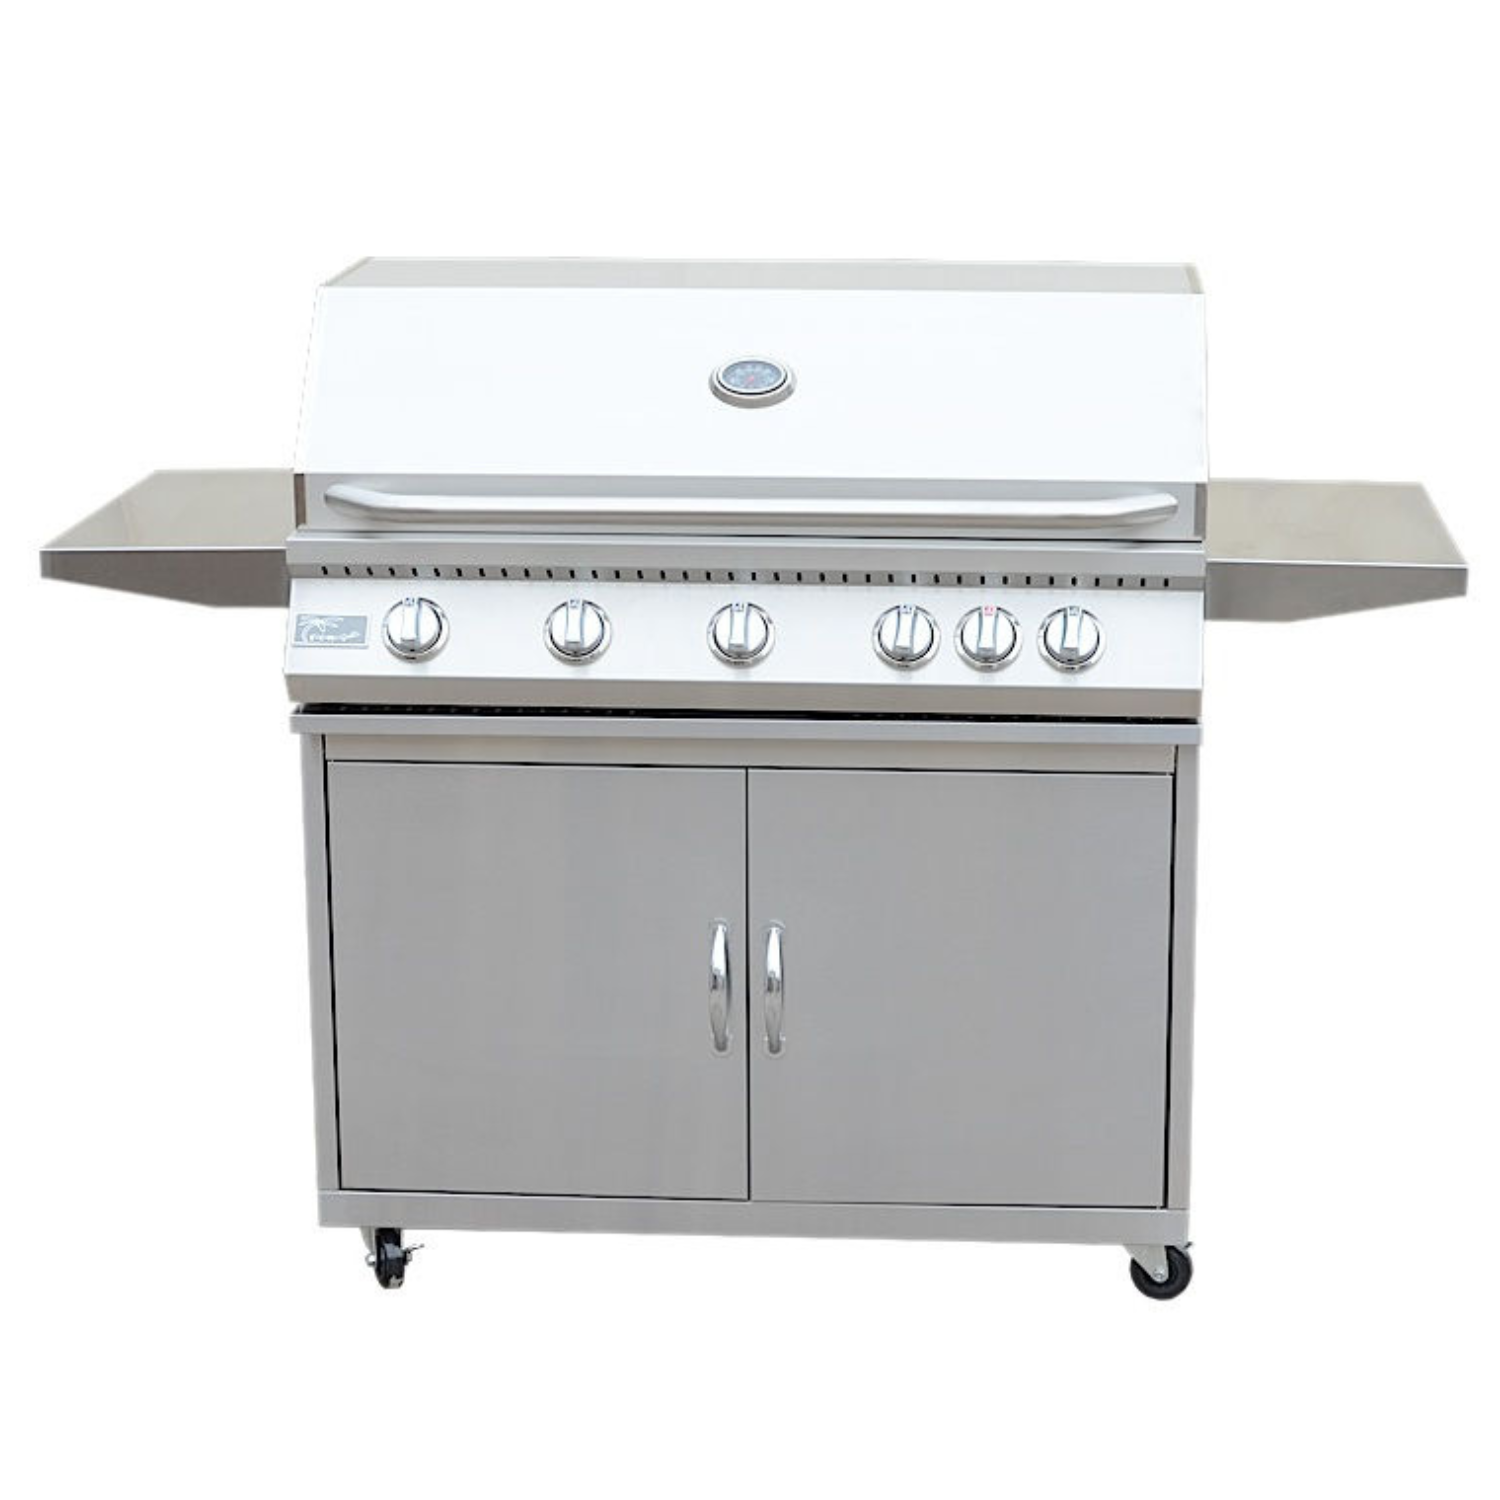 5 Burner 40 Inch Cart Model BBQ Grill With Locking Casters 304 Stainless Steel - ElitePlayPro